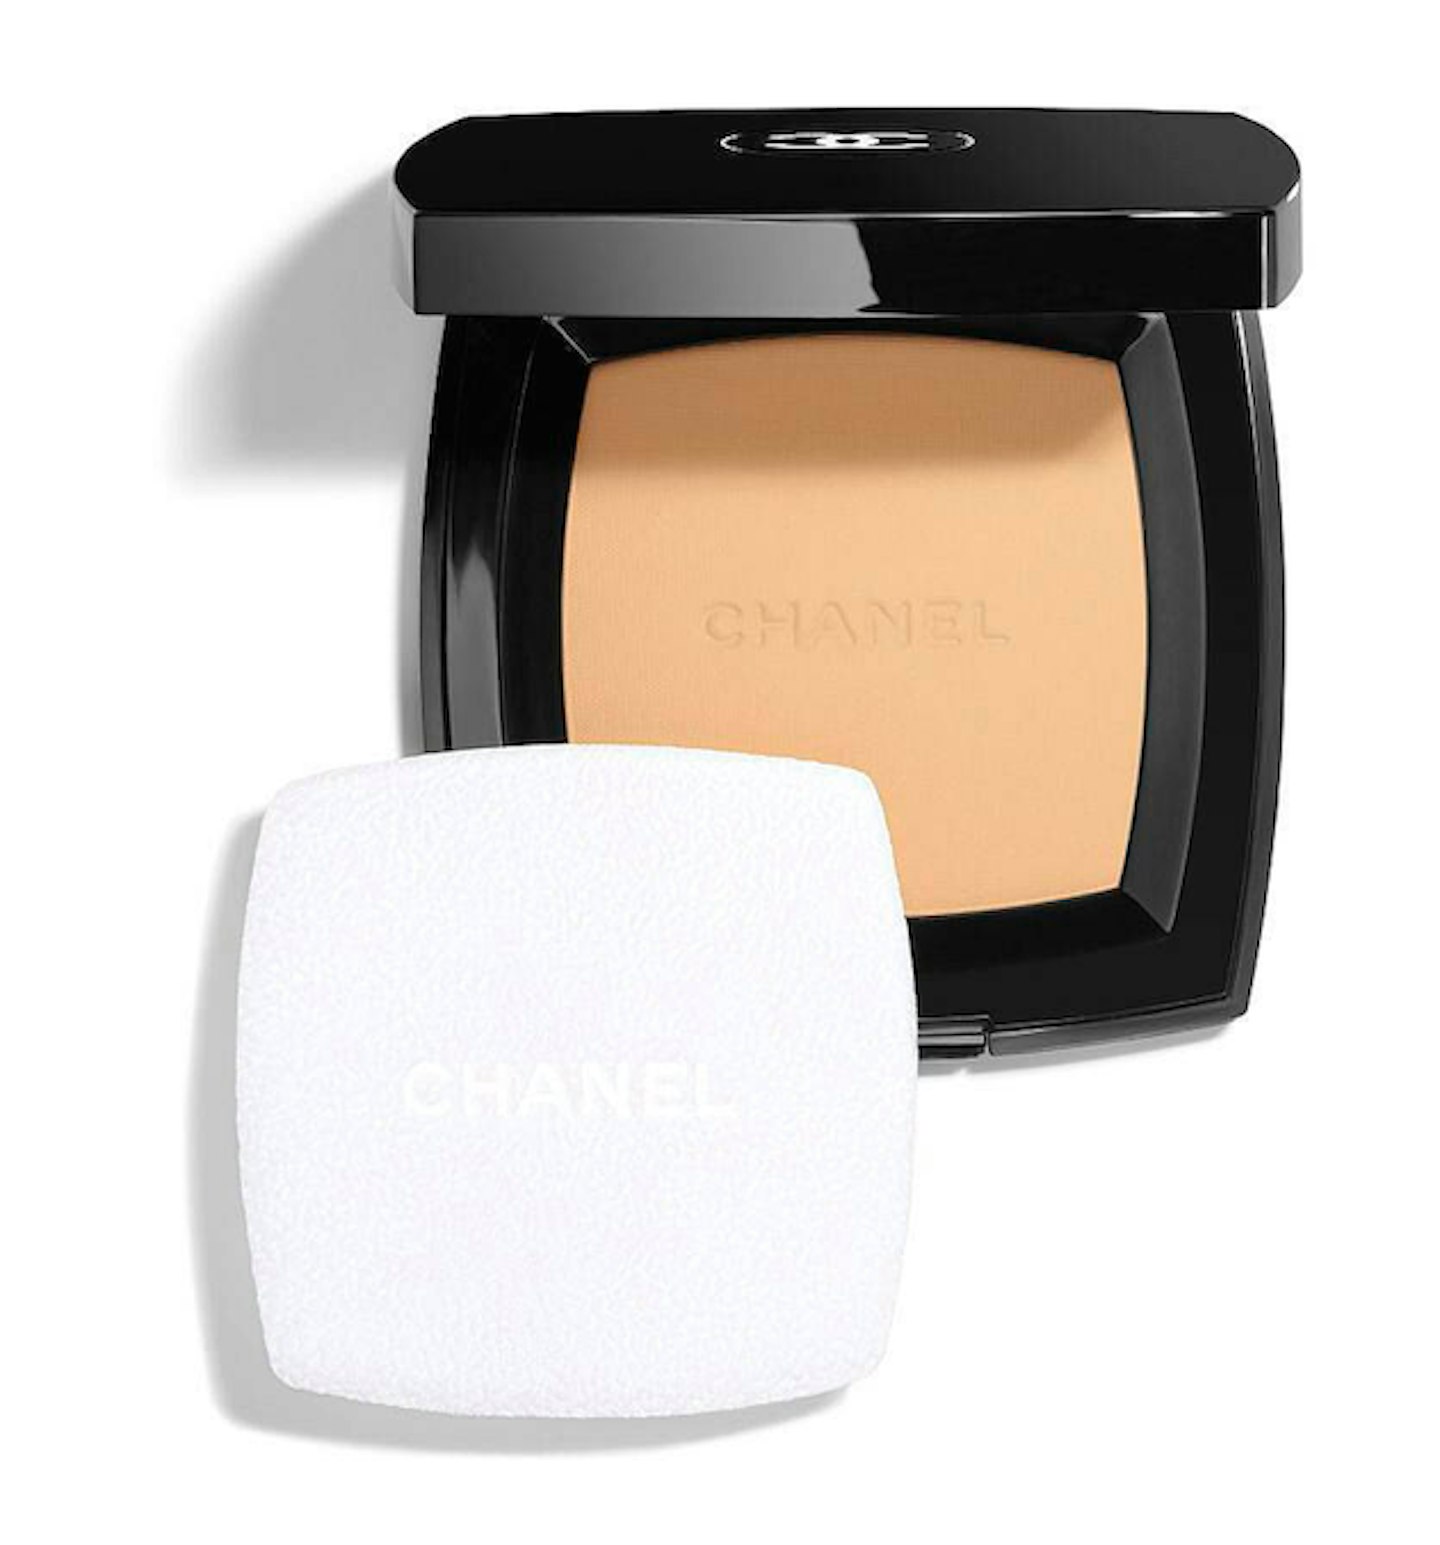 Chanel compact foundation